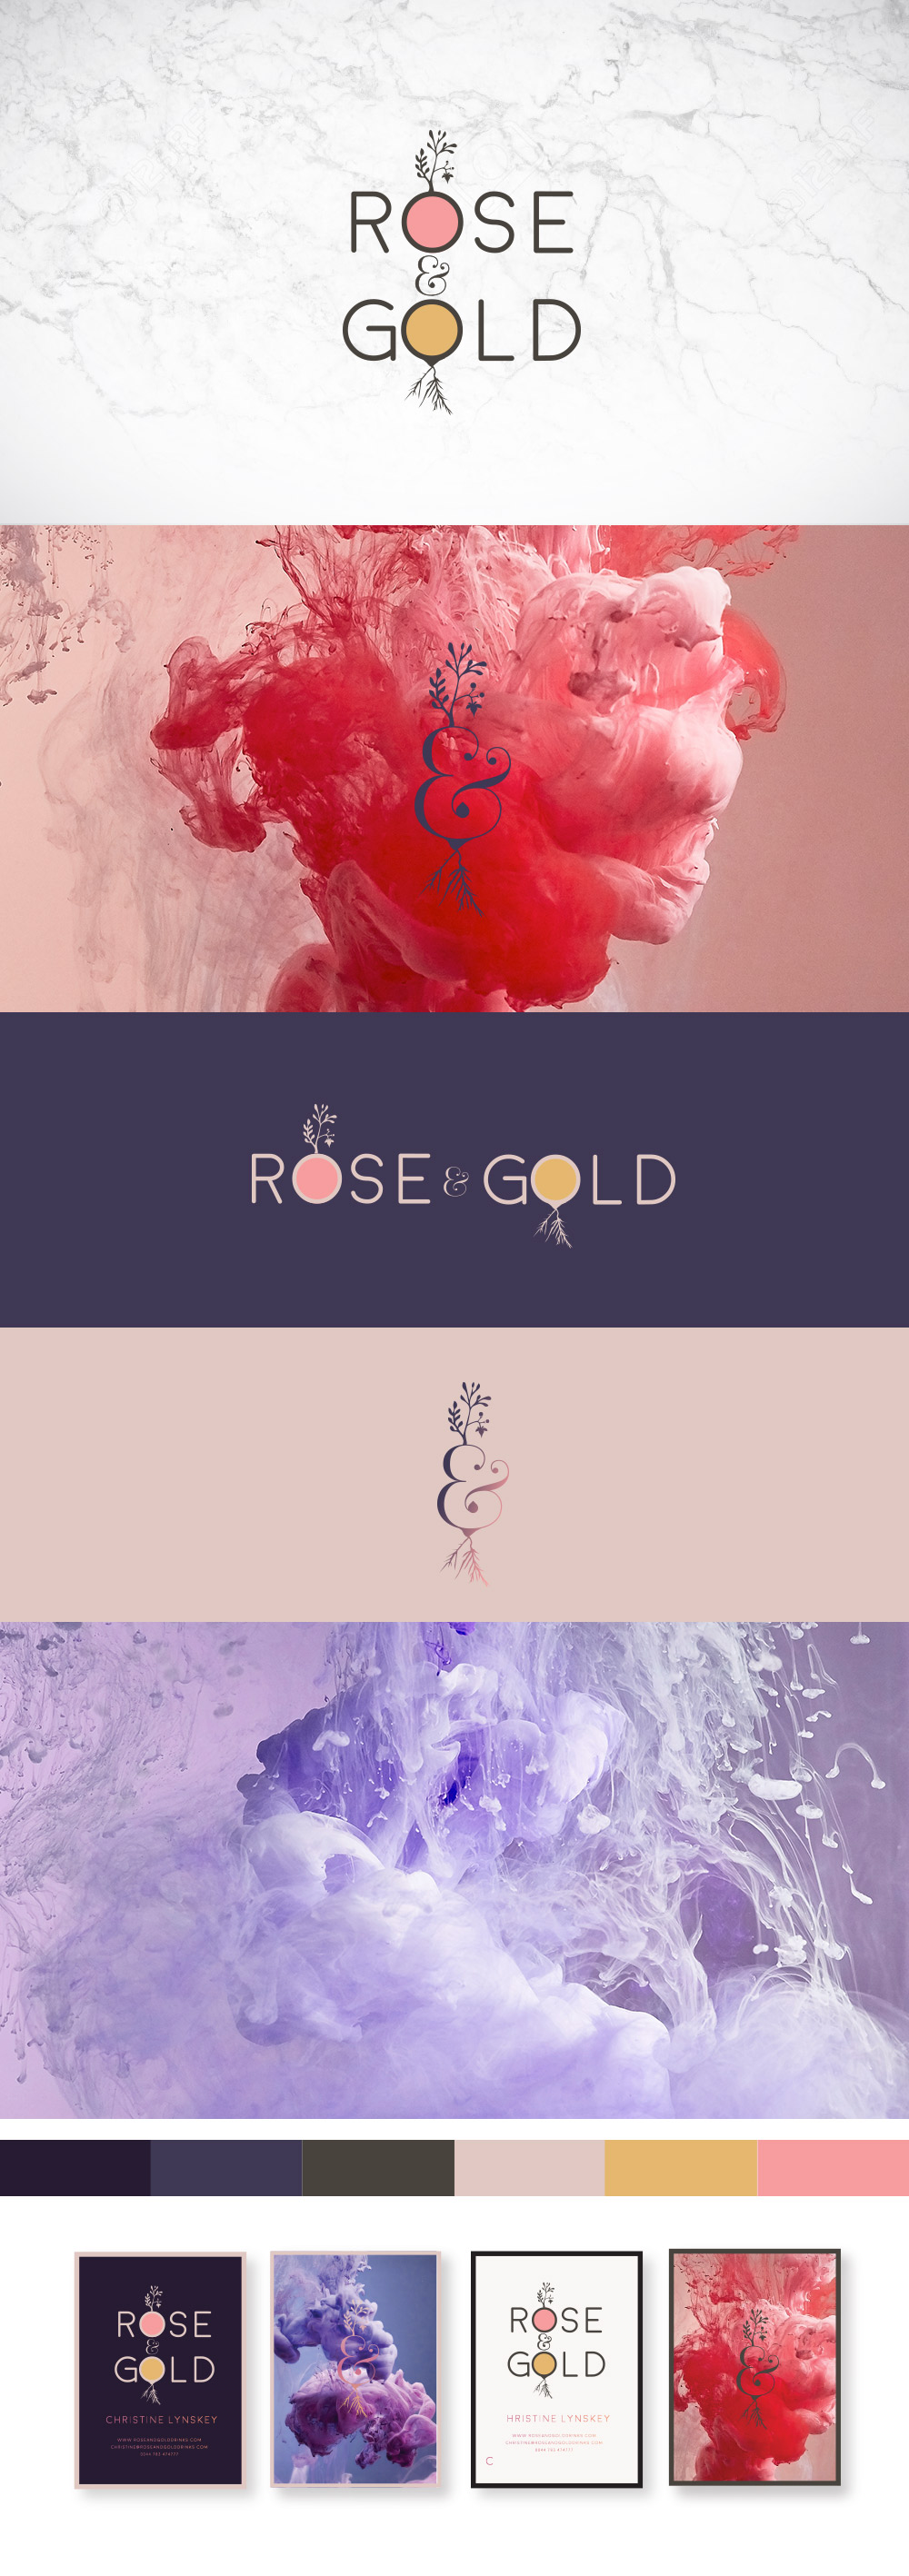 branding-design-for-health-drink-brand-Rose-and-Gold